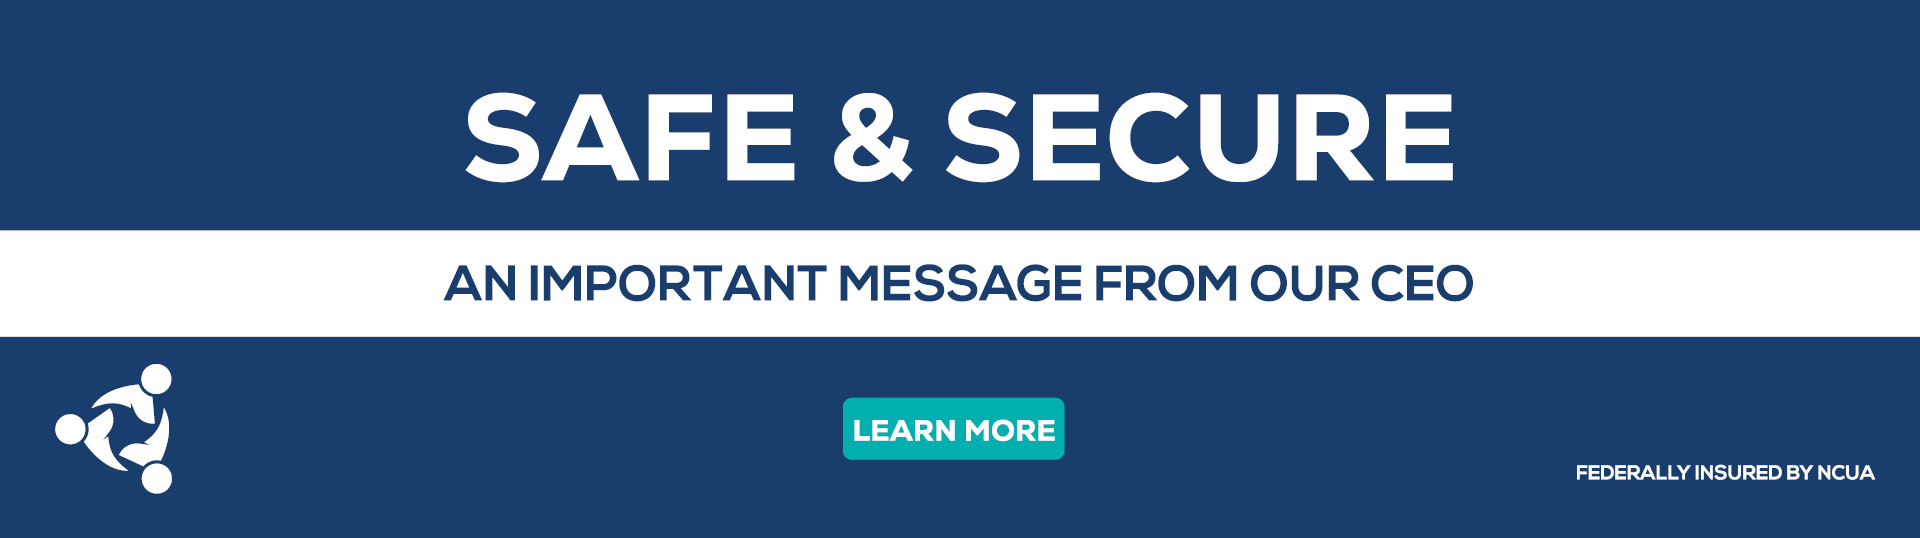 Safe and Secure banner learn more